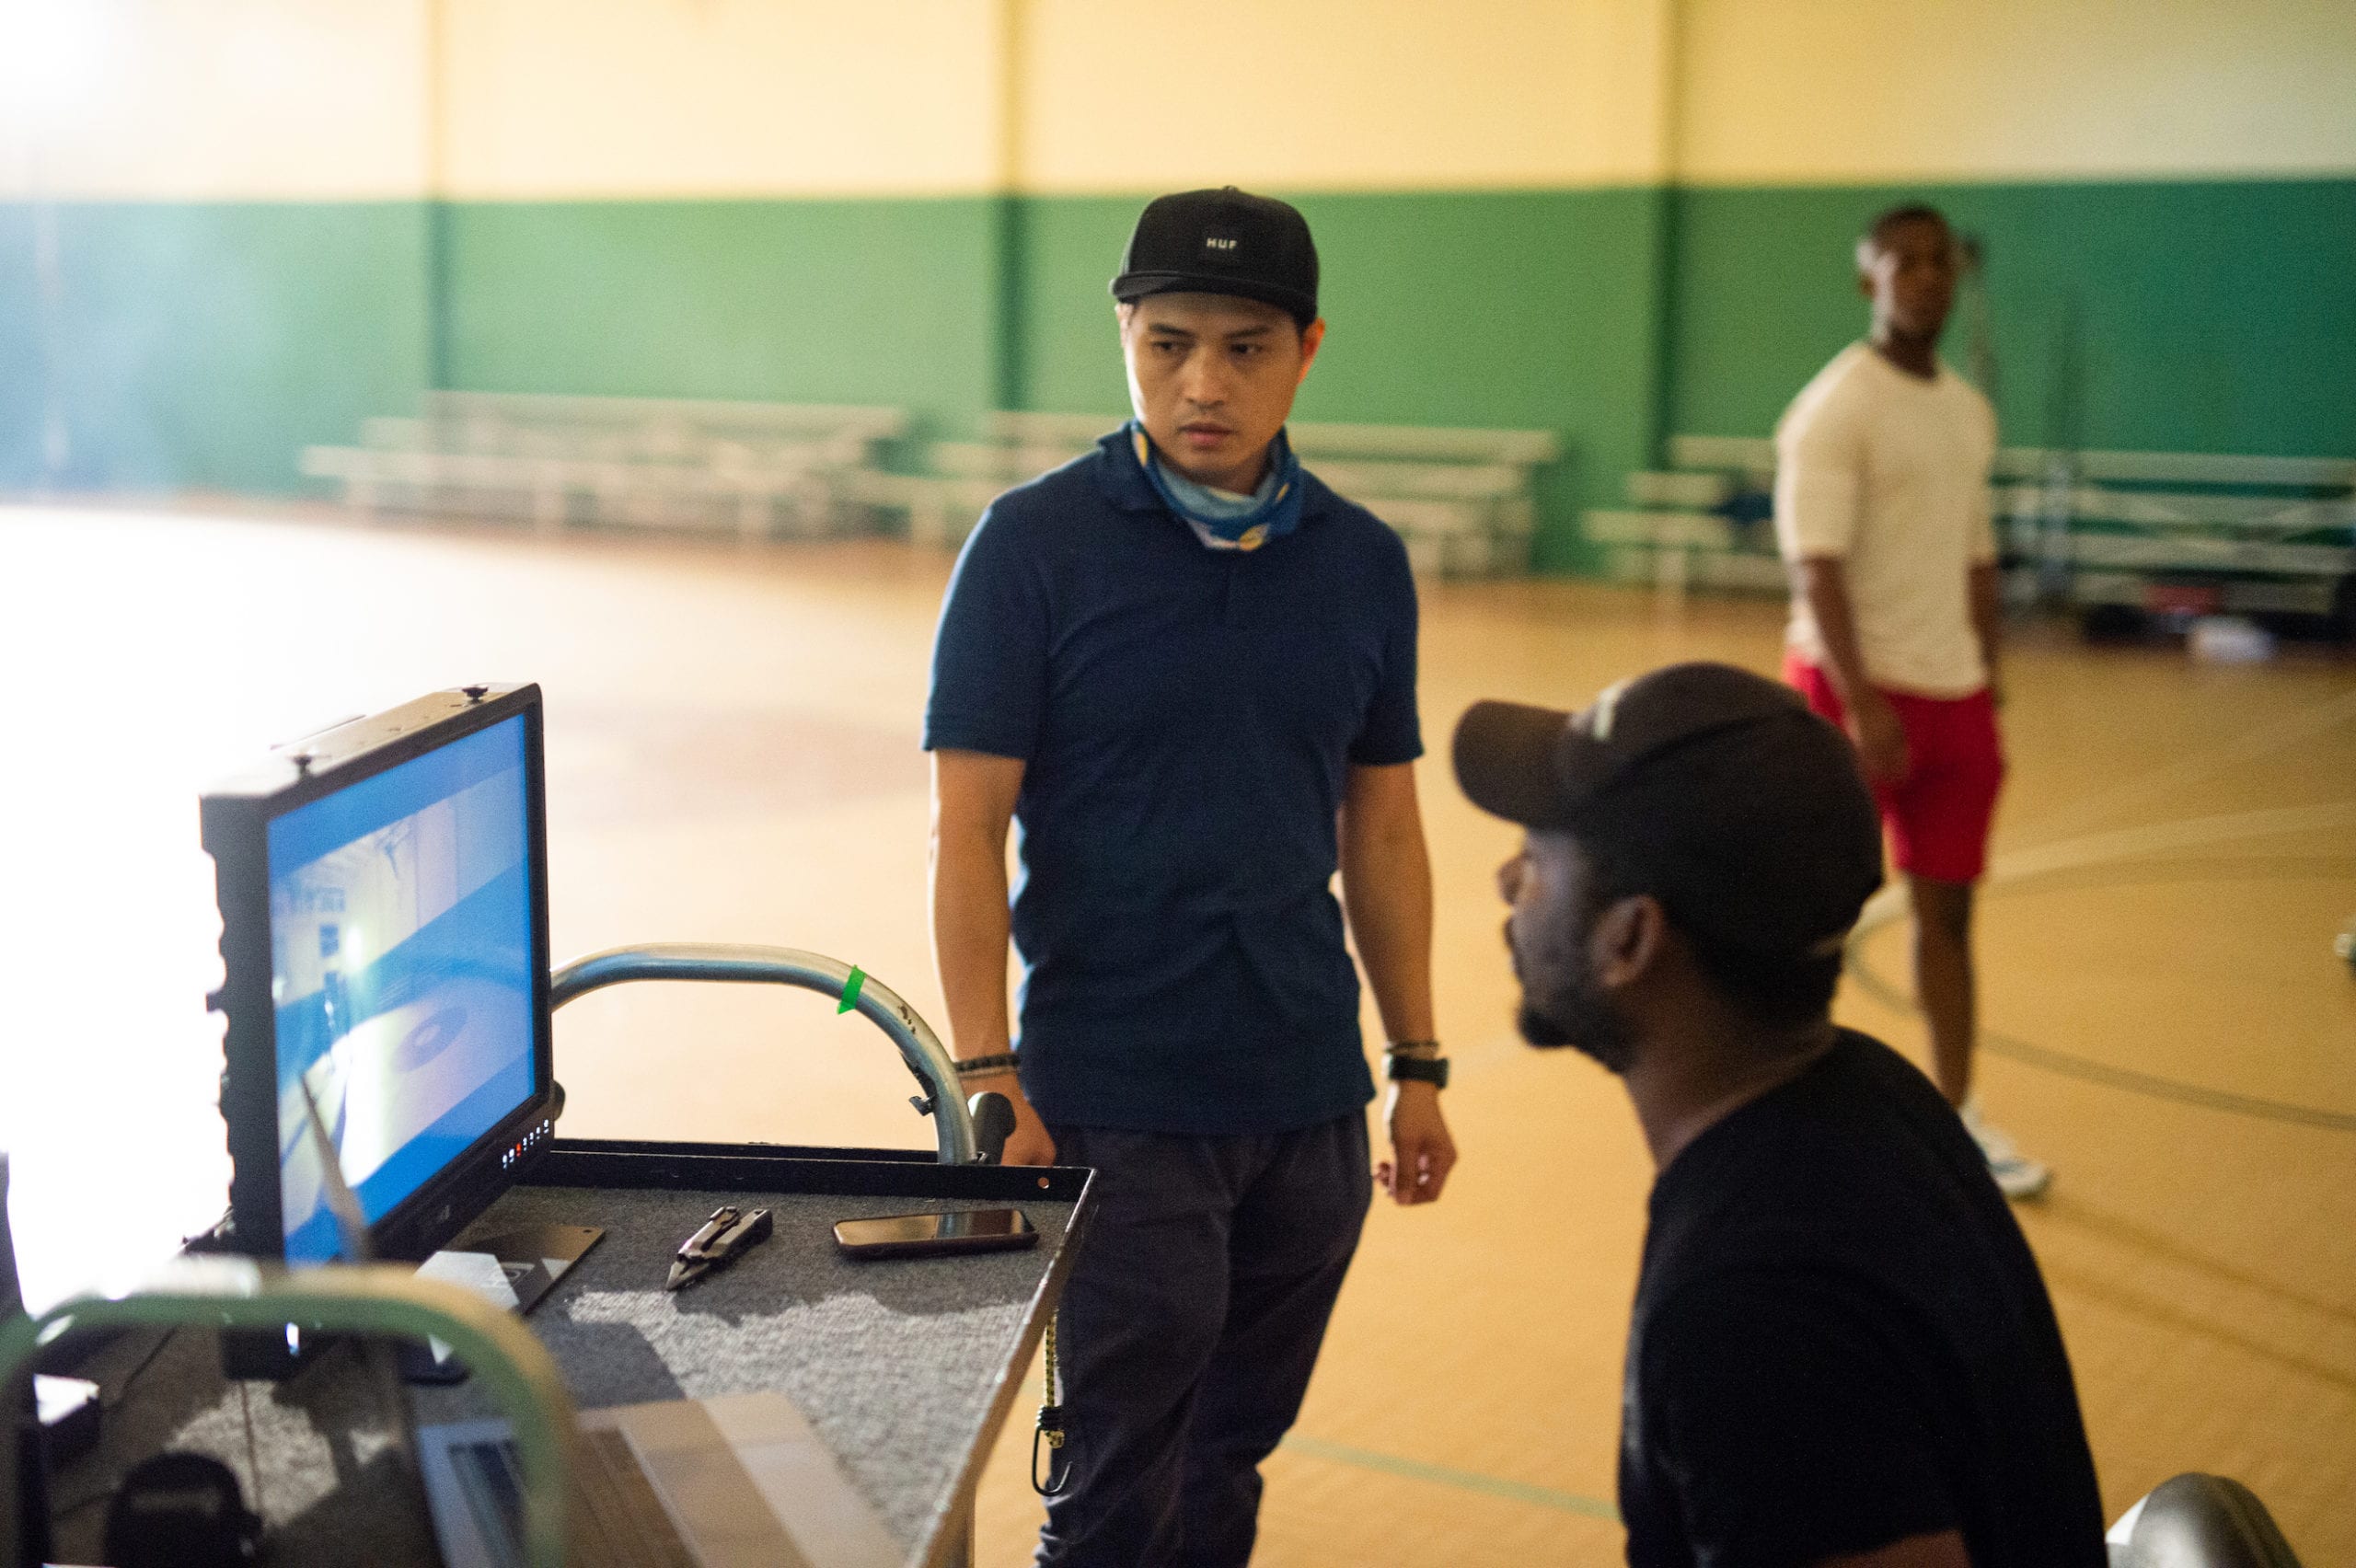 Nike African American man checking video equipment on a cart on a basketball court with another crew member looking on